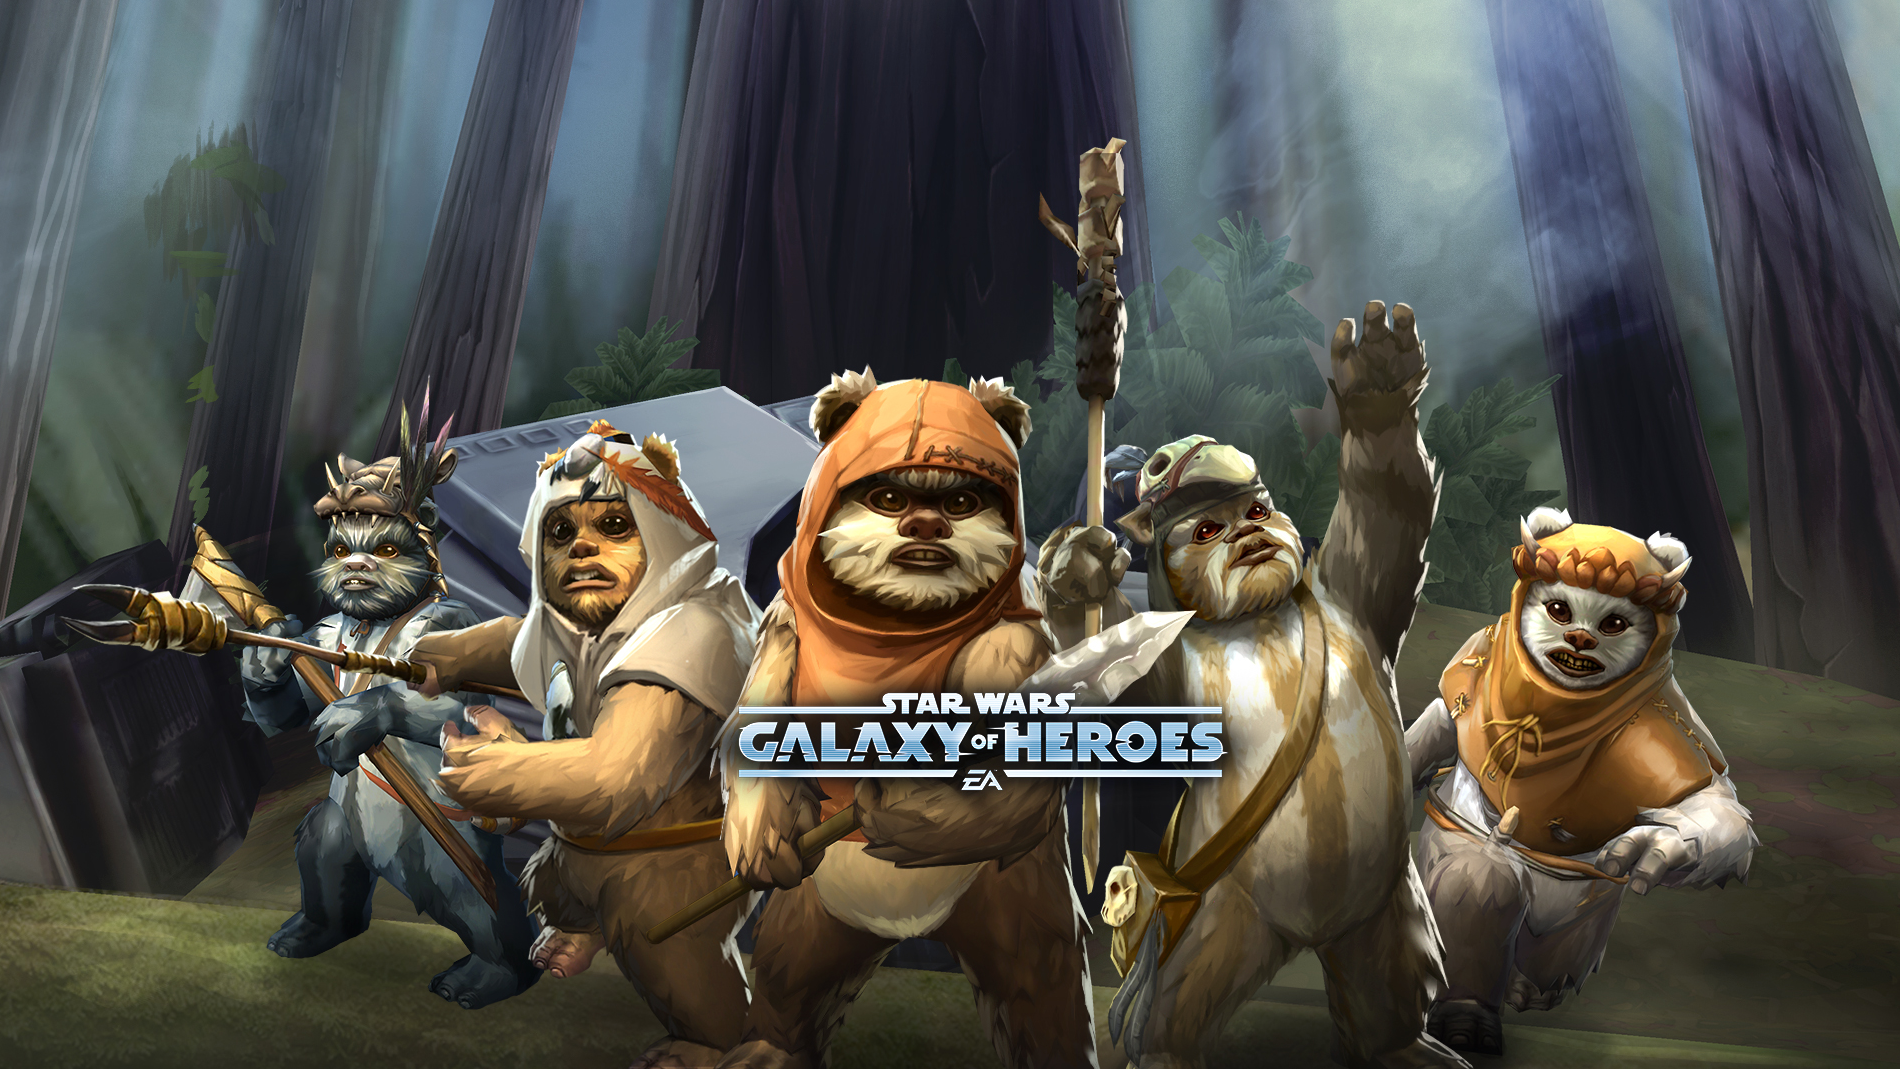 Video Game Star Wars: Galaxy of Heroes HD Wallpaper | Background Image